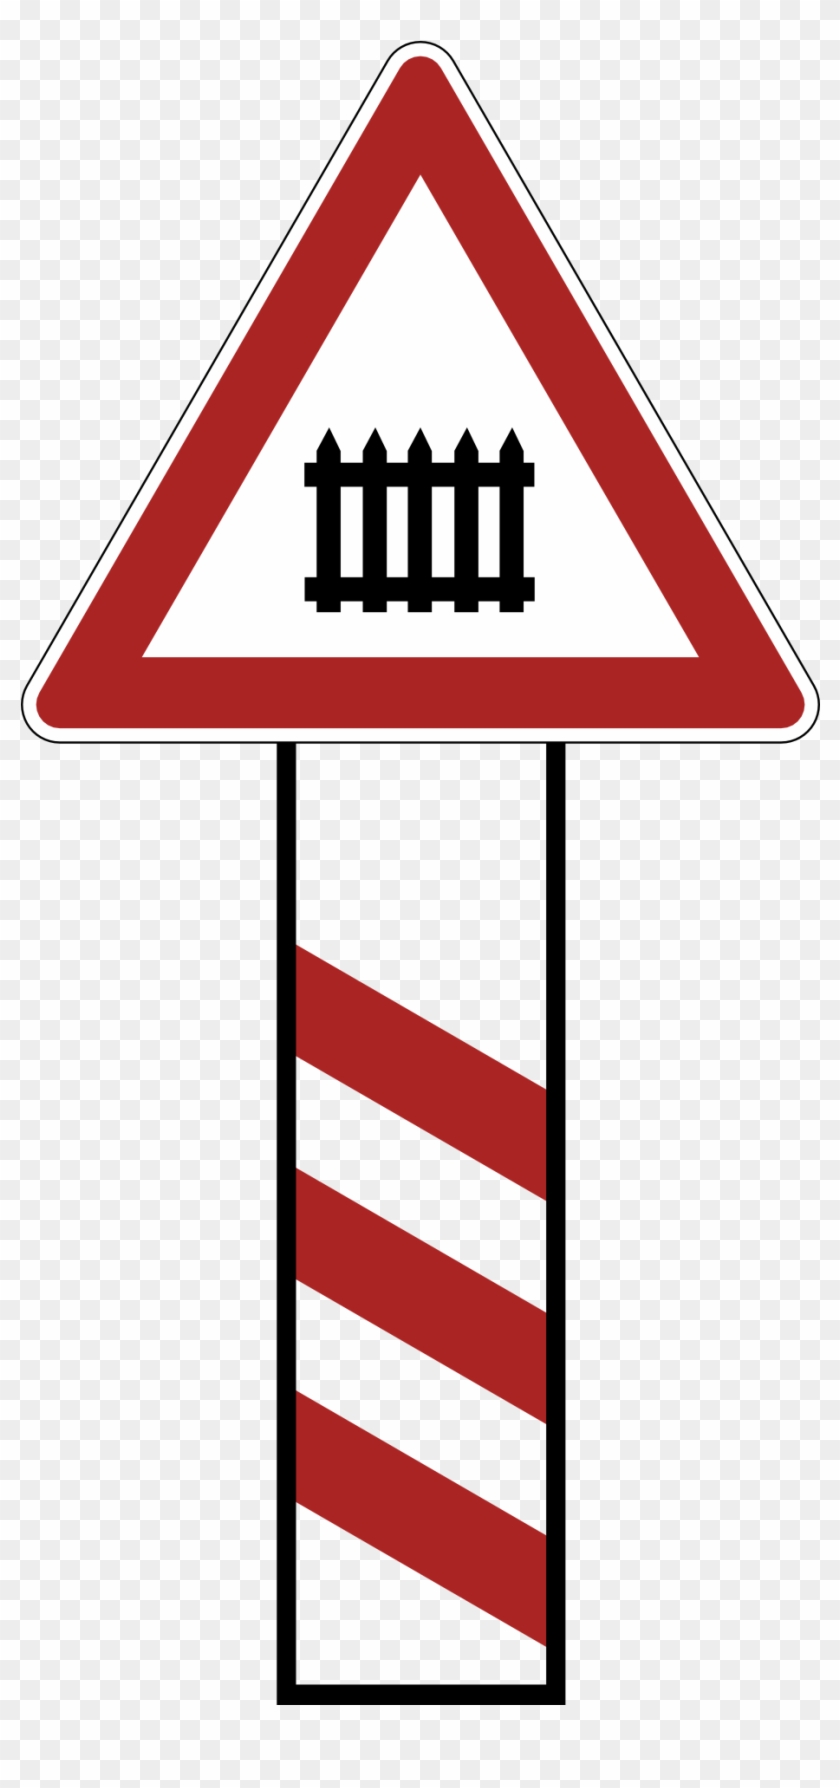 Germany Level Crossing Warning Sign Traffic Sign Road - Germany Level Crossing Warning Sign Traffic Sign Road #557897